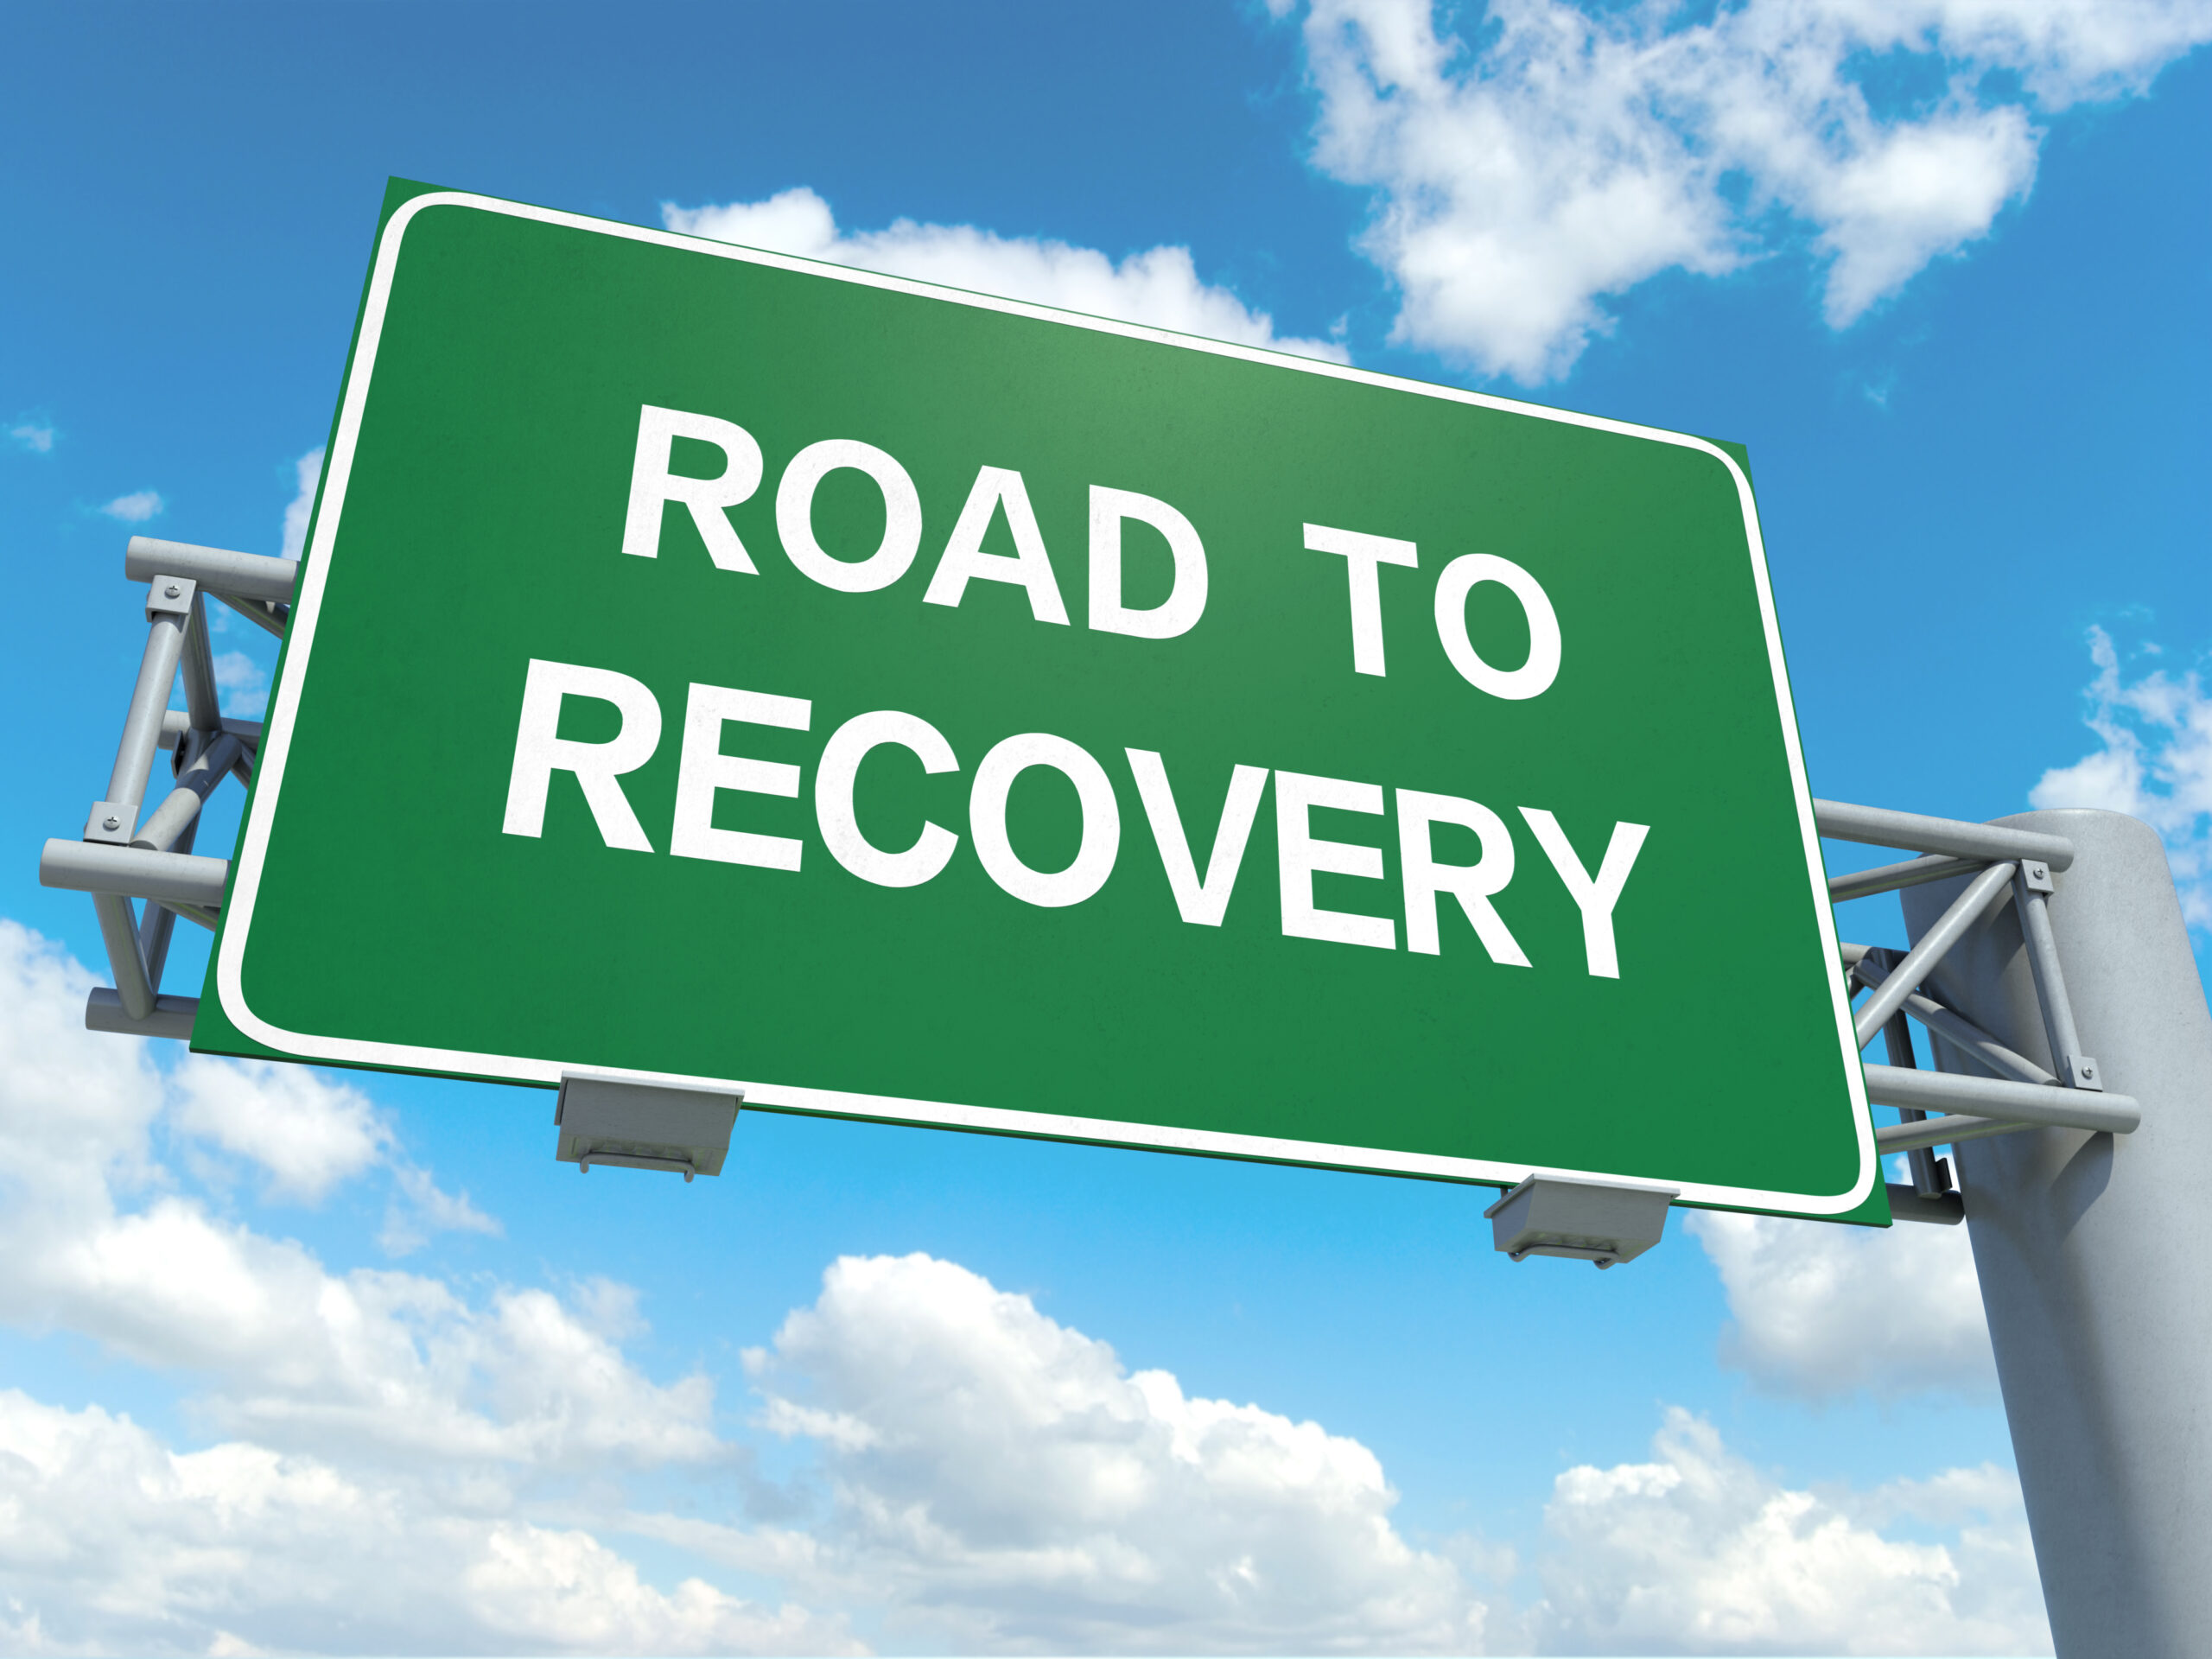 Road to recovery: Symptoms after Covid-19.